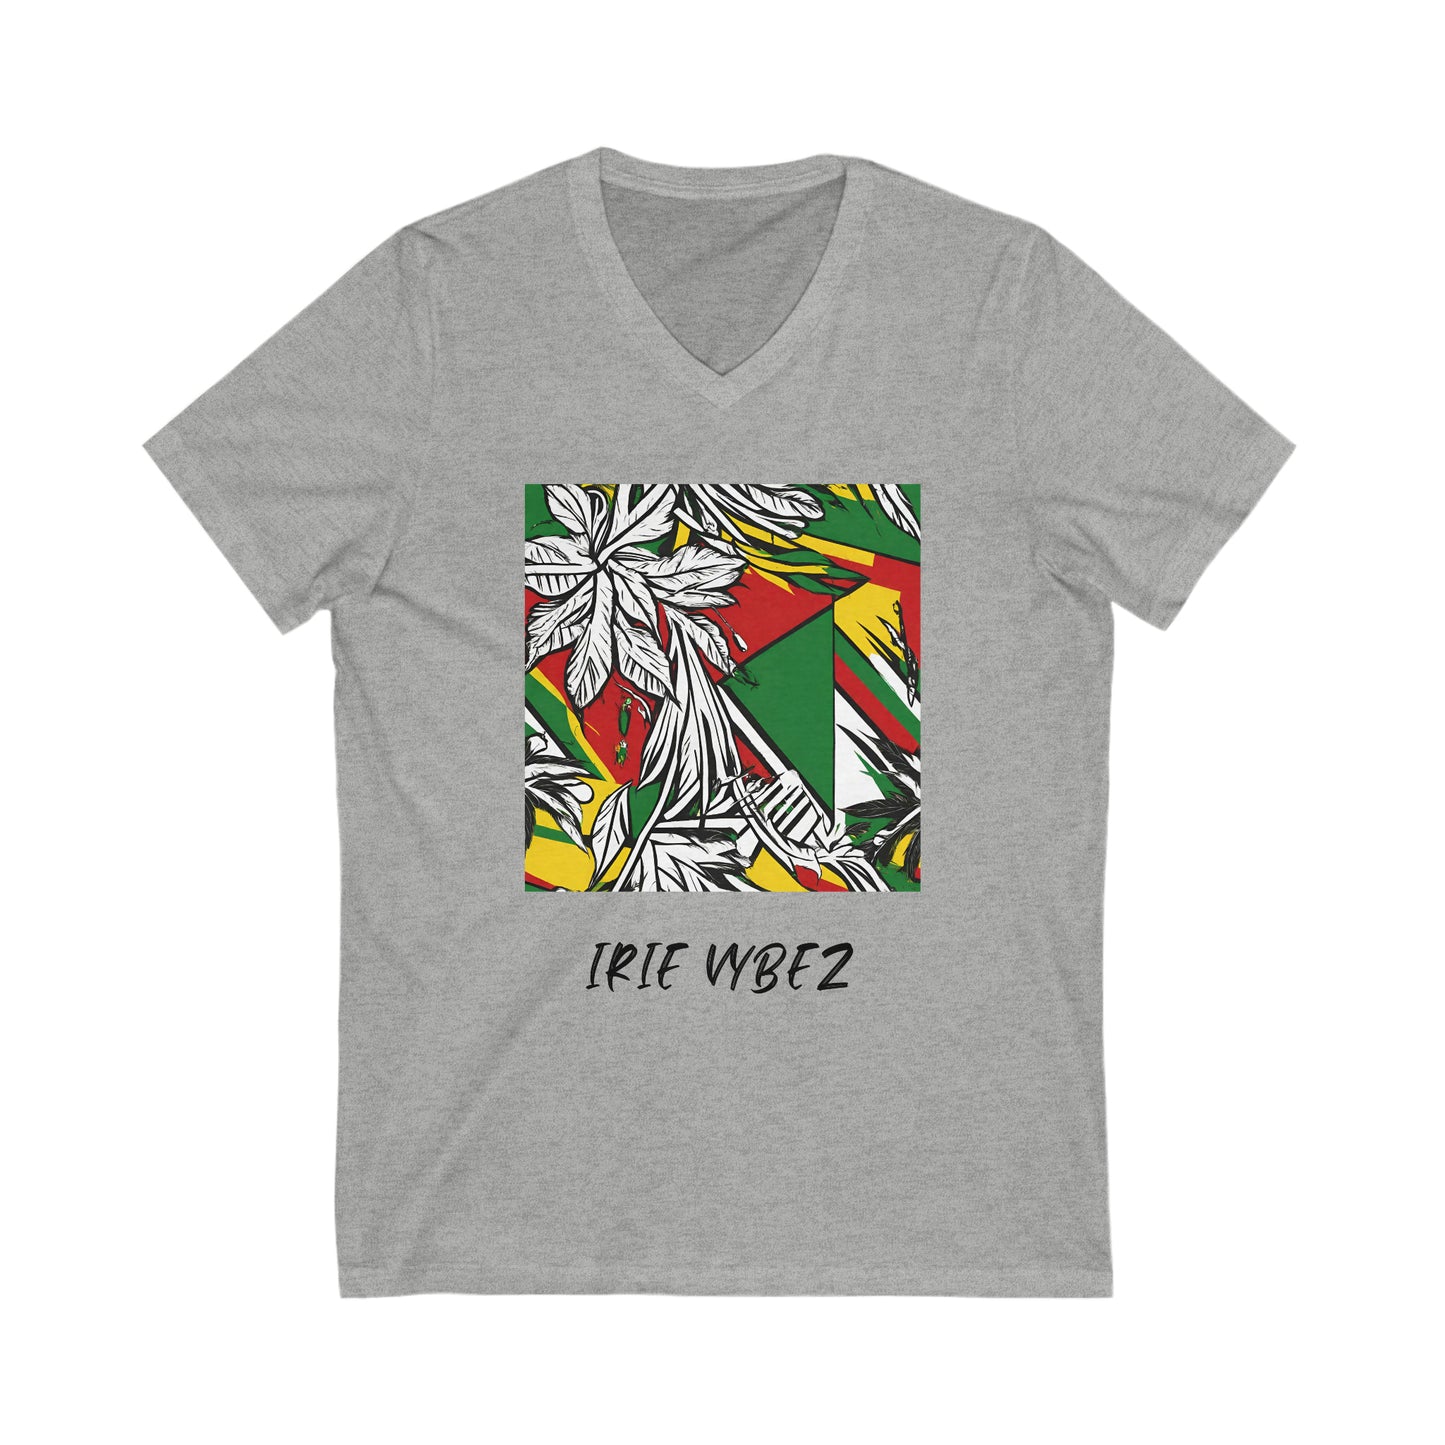 IRIE VYBEZ  GRAPHIC ROOTS DESIGN  V NECK TEE SHIRT